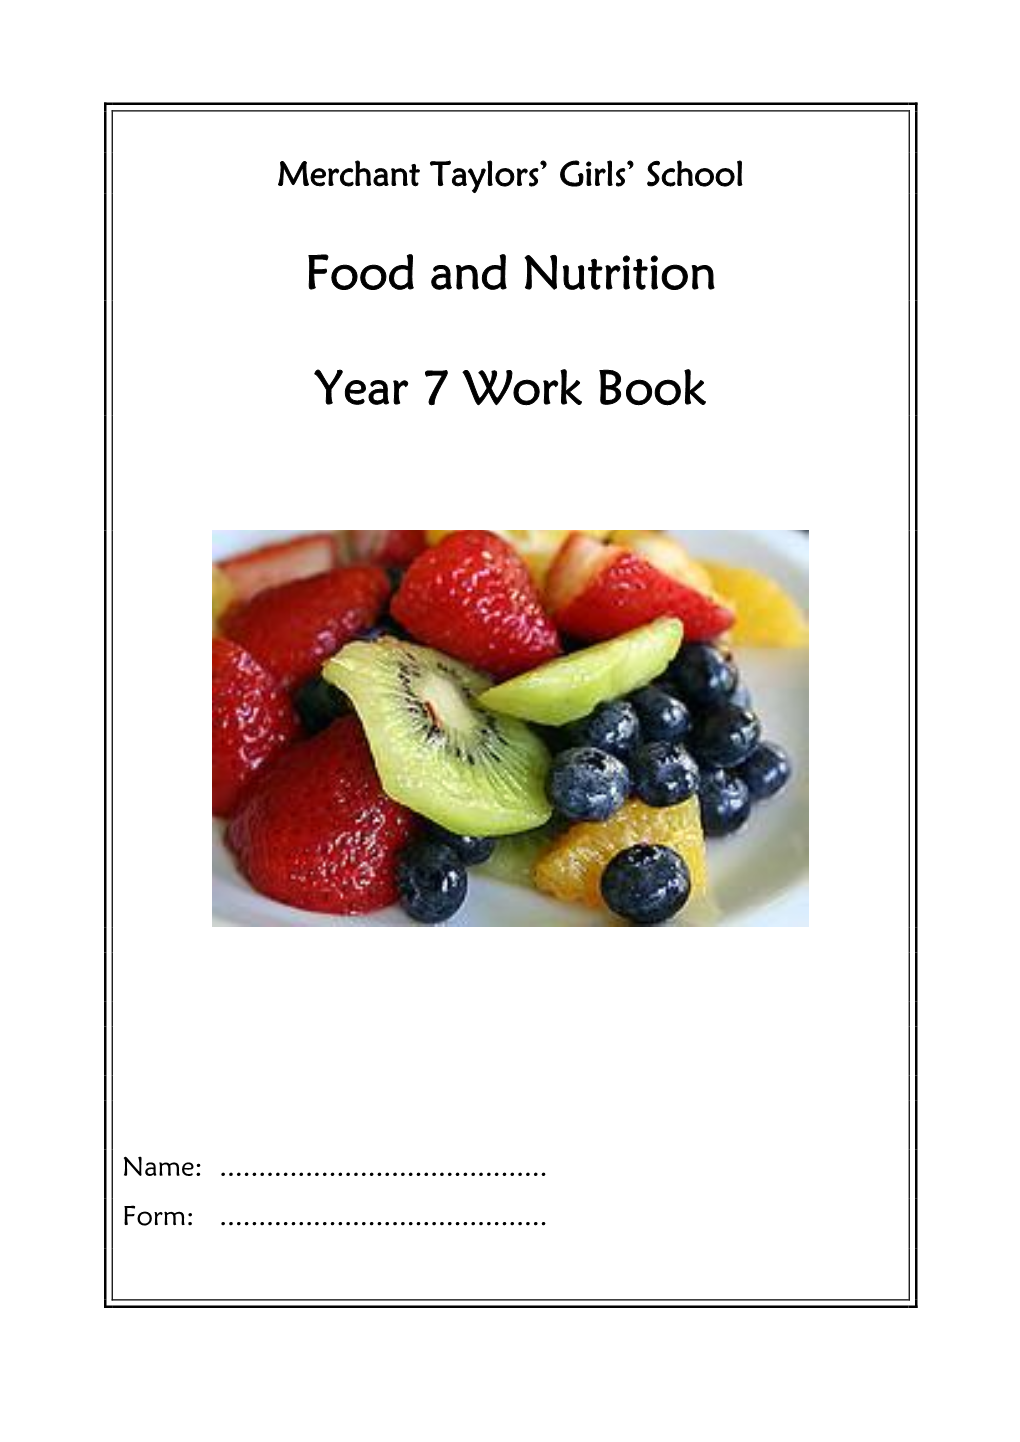 Food and Nutrition Year 7 Work Book